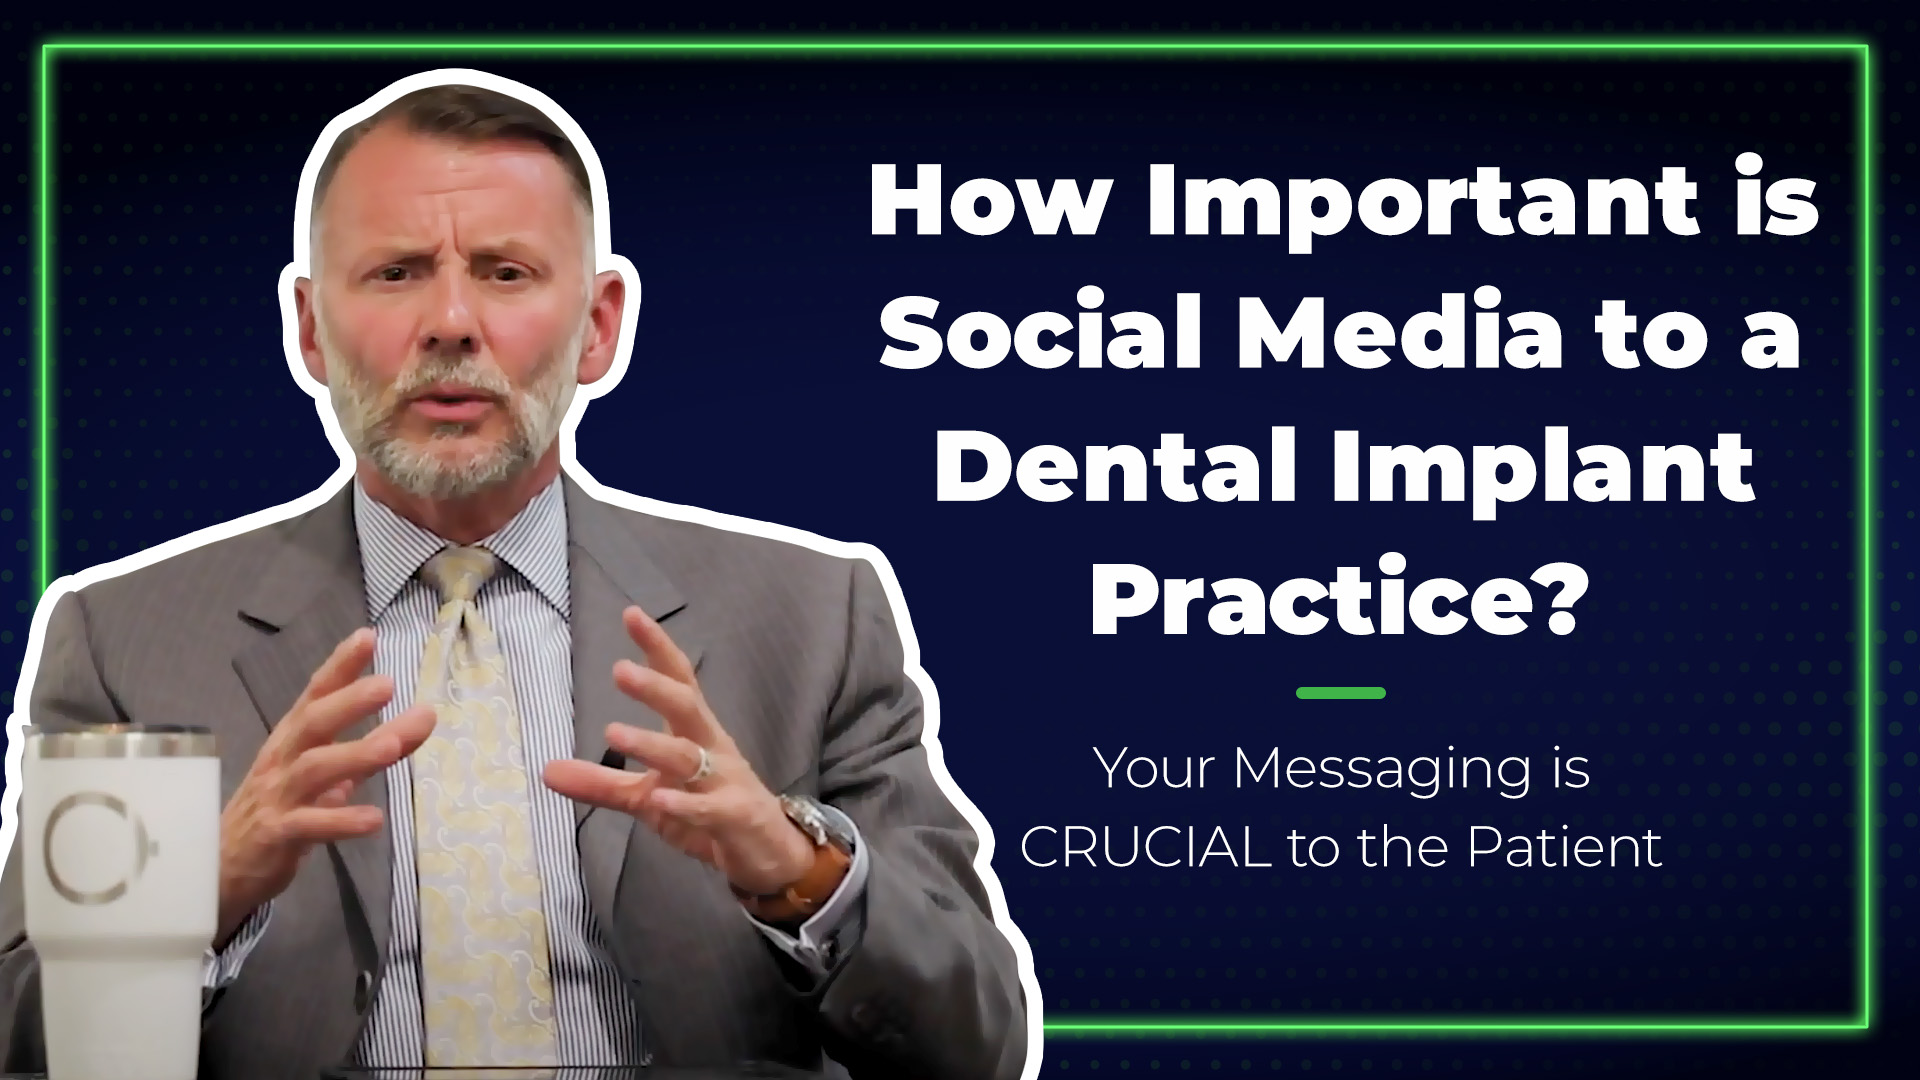 Tools to grow your practice | How Importan is Social Media to a Dental Implant Practice Your Messaging is Crucial to the Patient